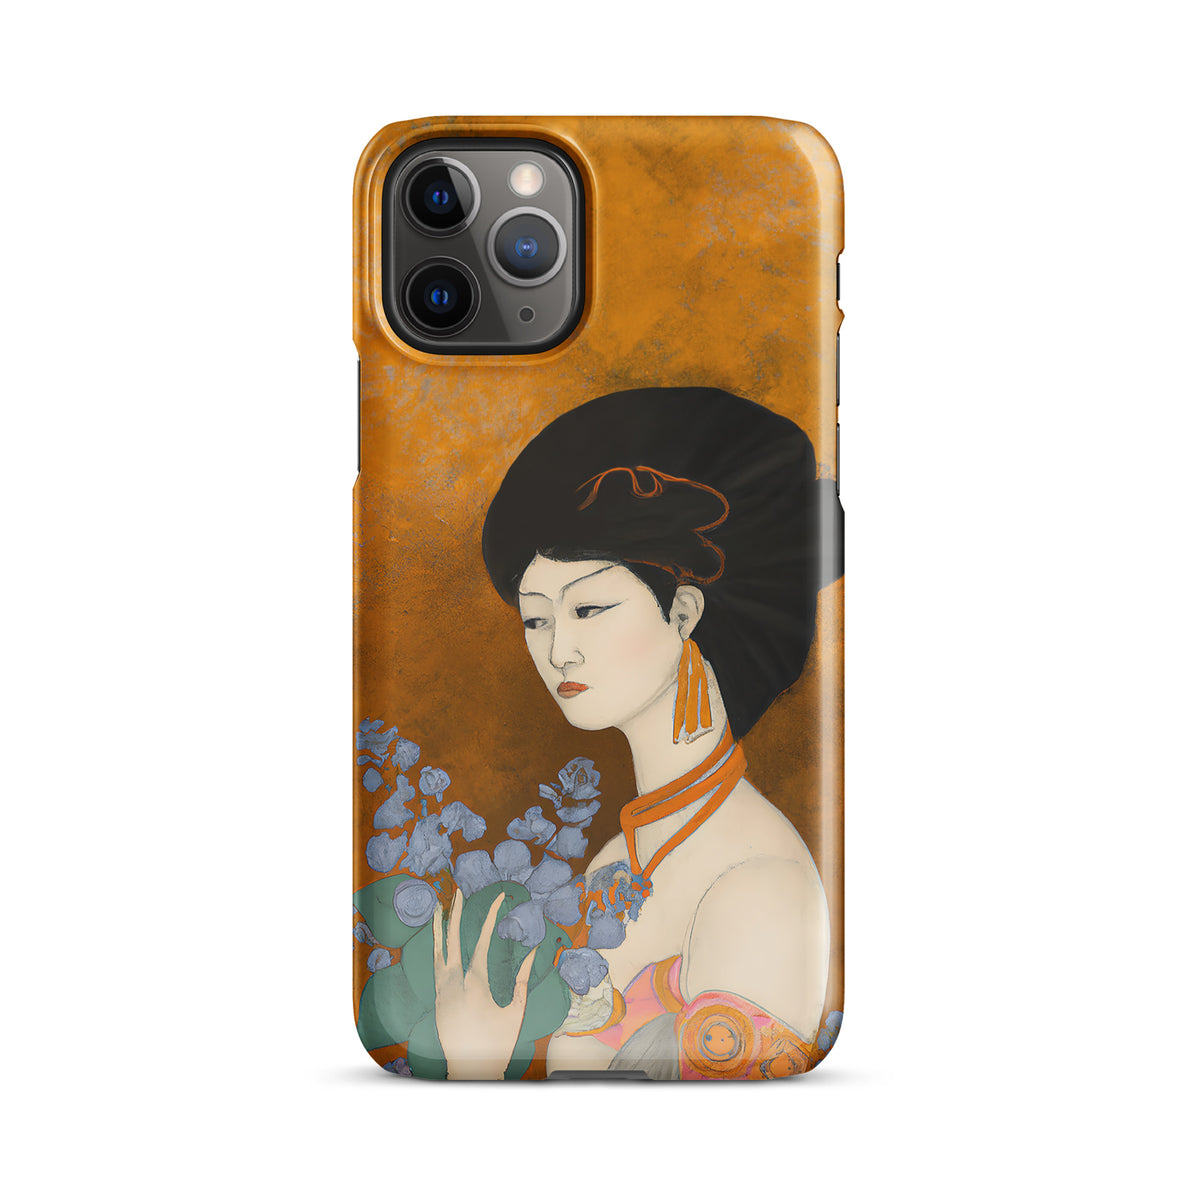 iPhone case with a painted image of a Geisha holding some violets 